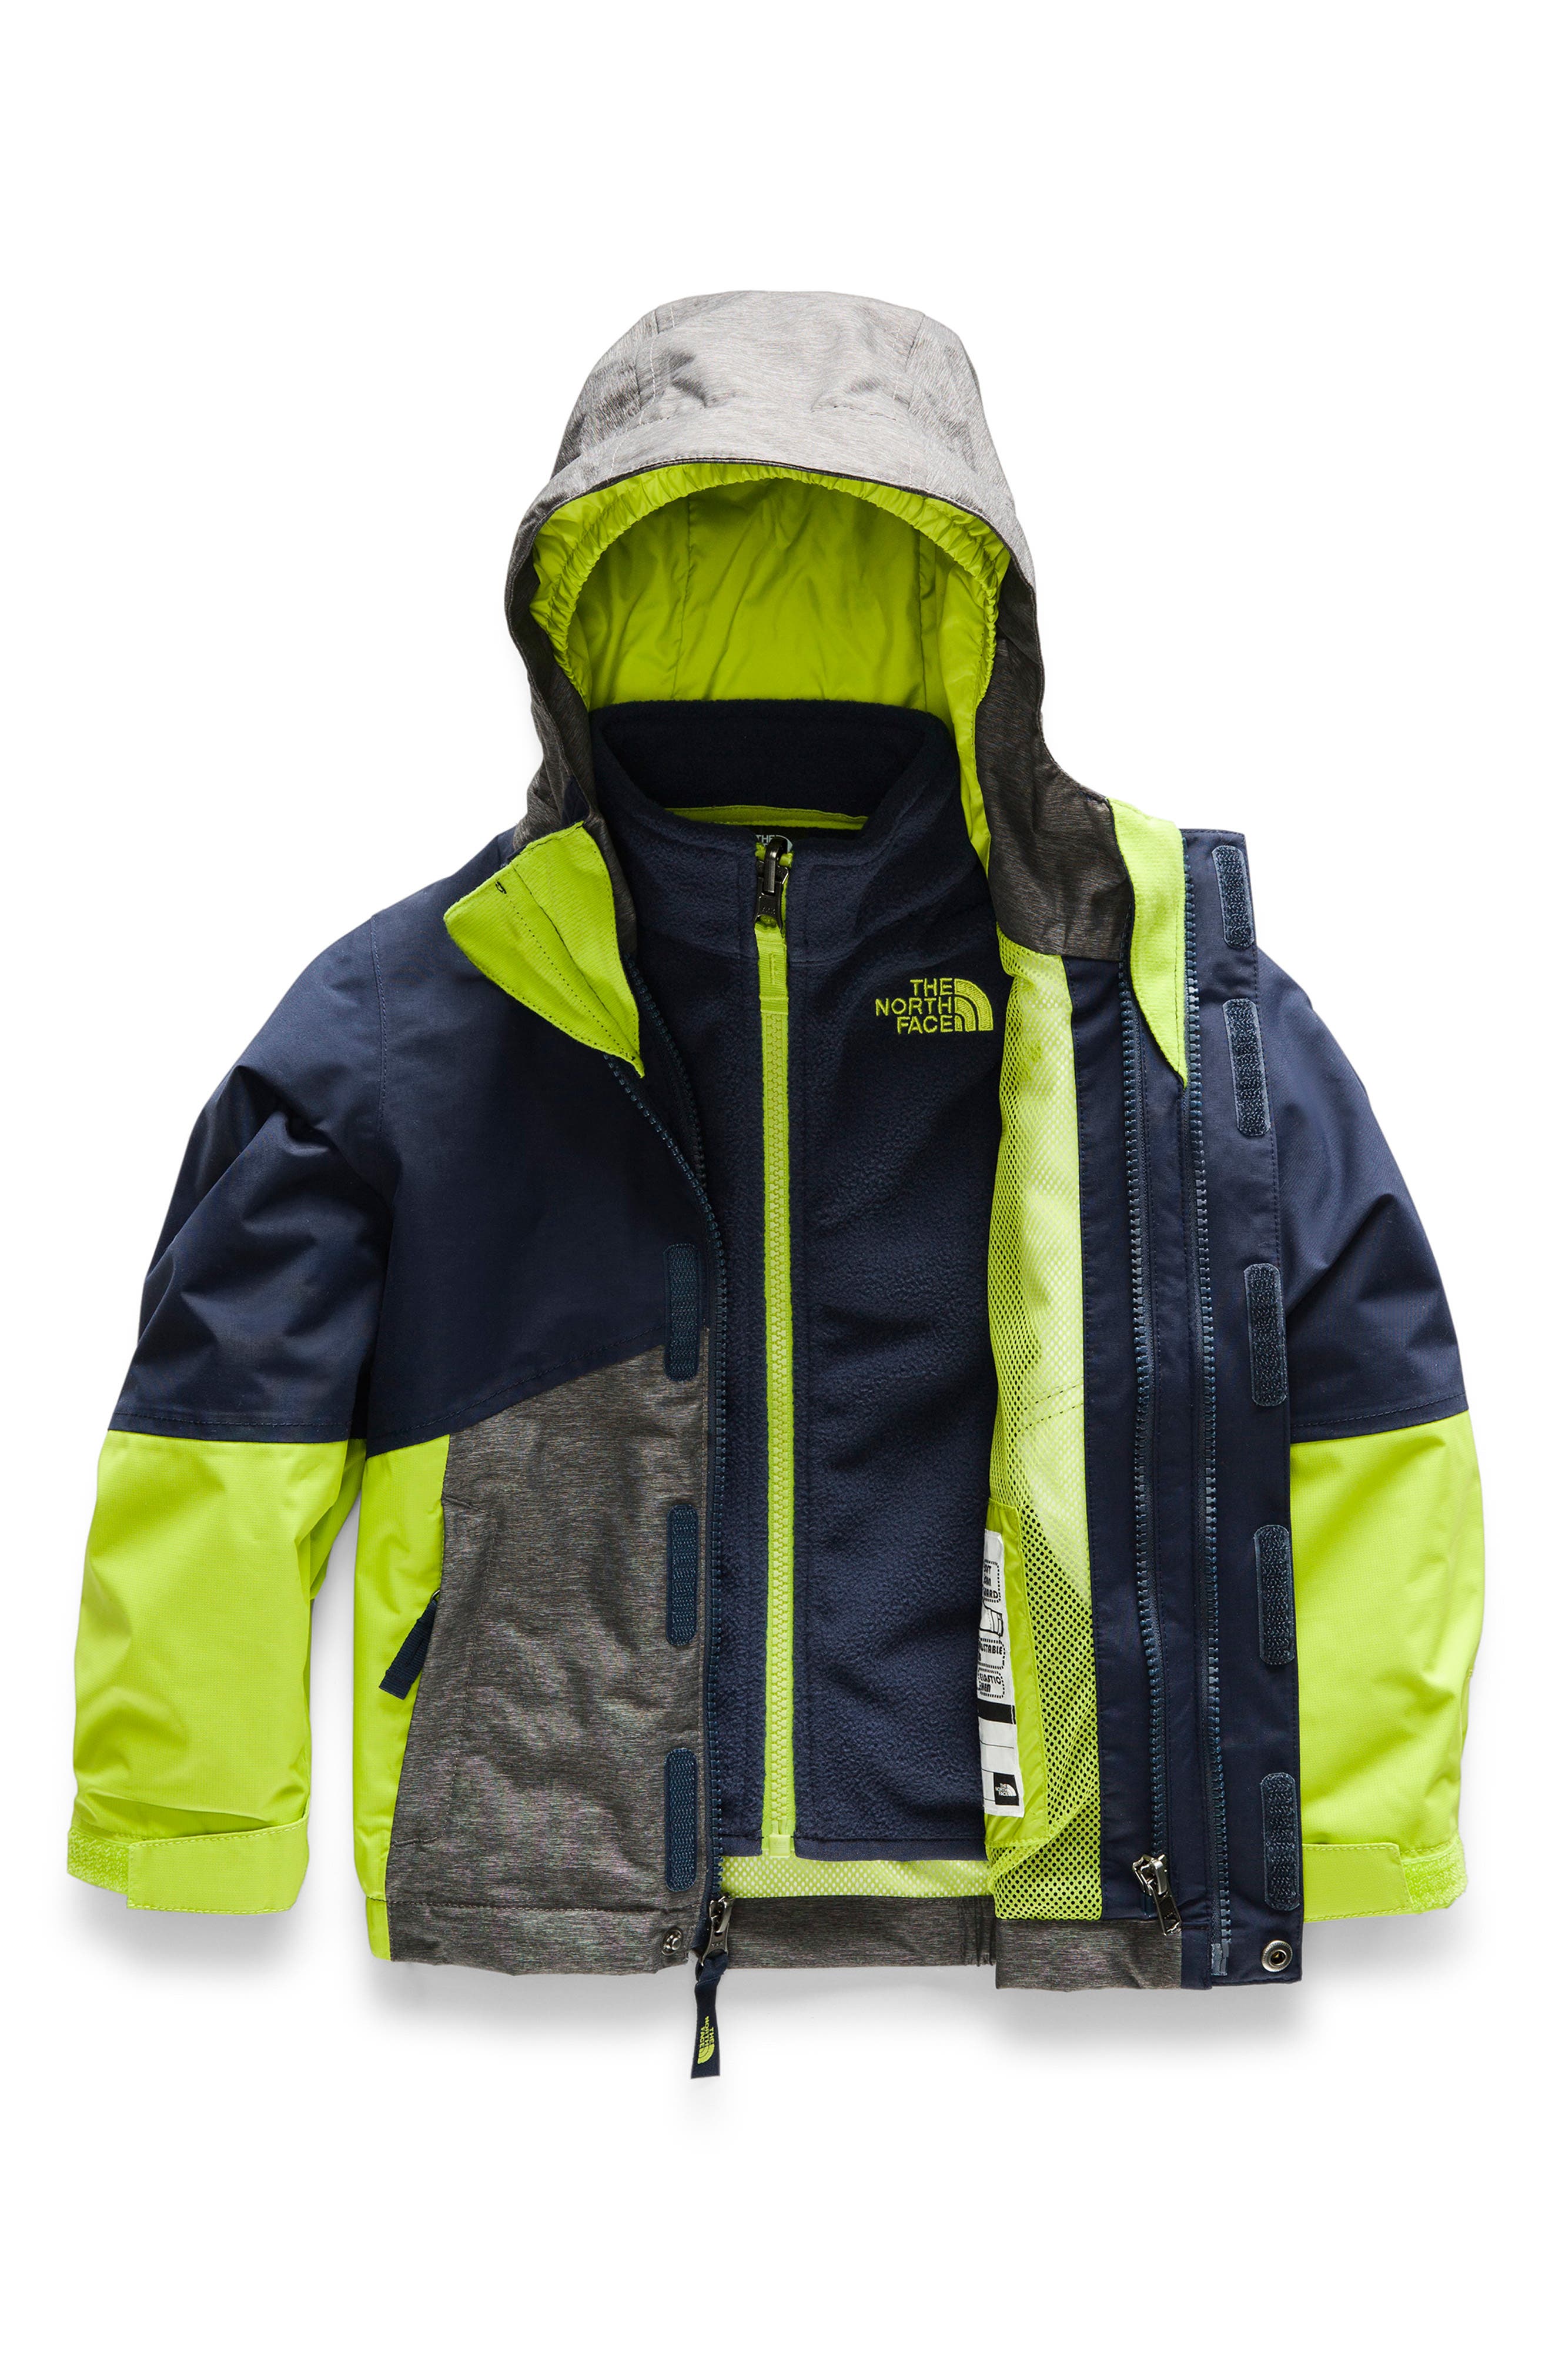 north face 3 in 1 parka